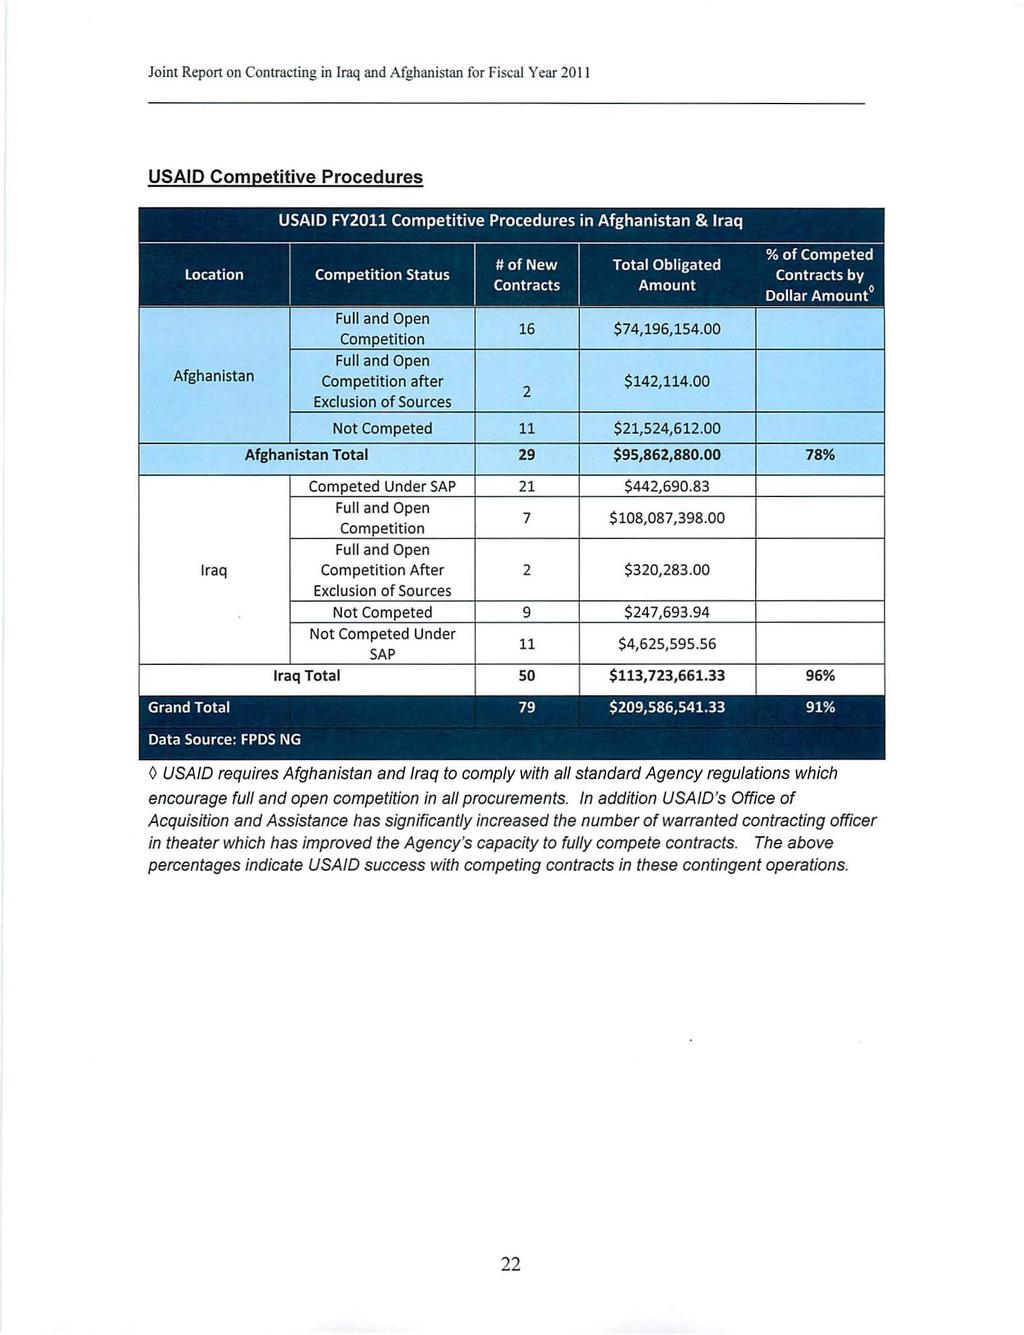 USAID Competitive Procedures Full and Open i 16 $74,196,154.00 Full and Open Afghanistan Competition after $142,114.00 2 Exclusion of Sources Not Competed 11 $21,524,612.